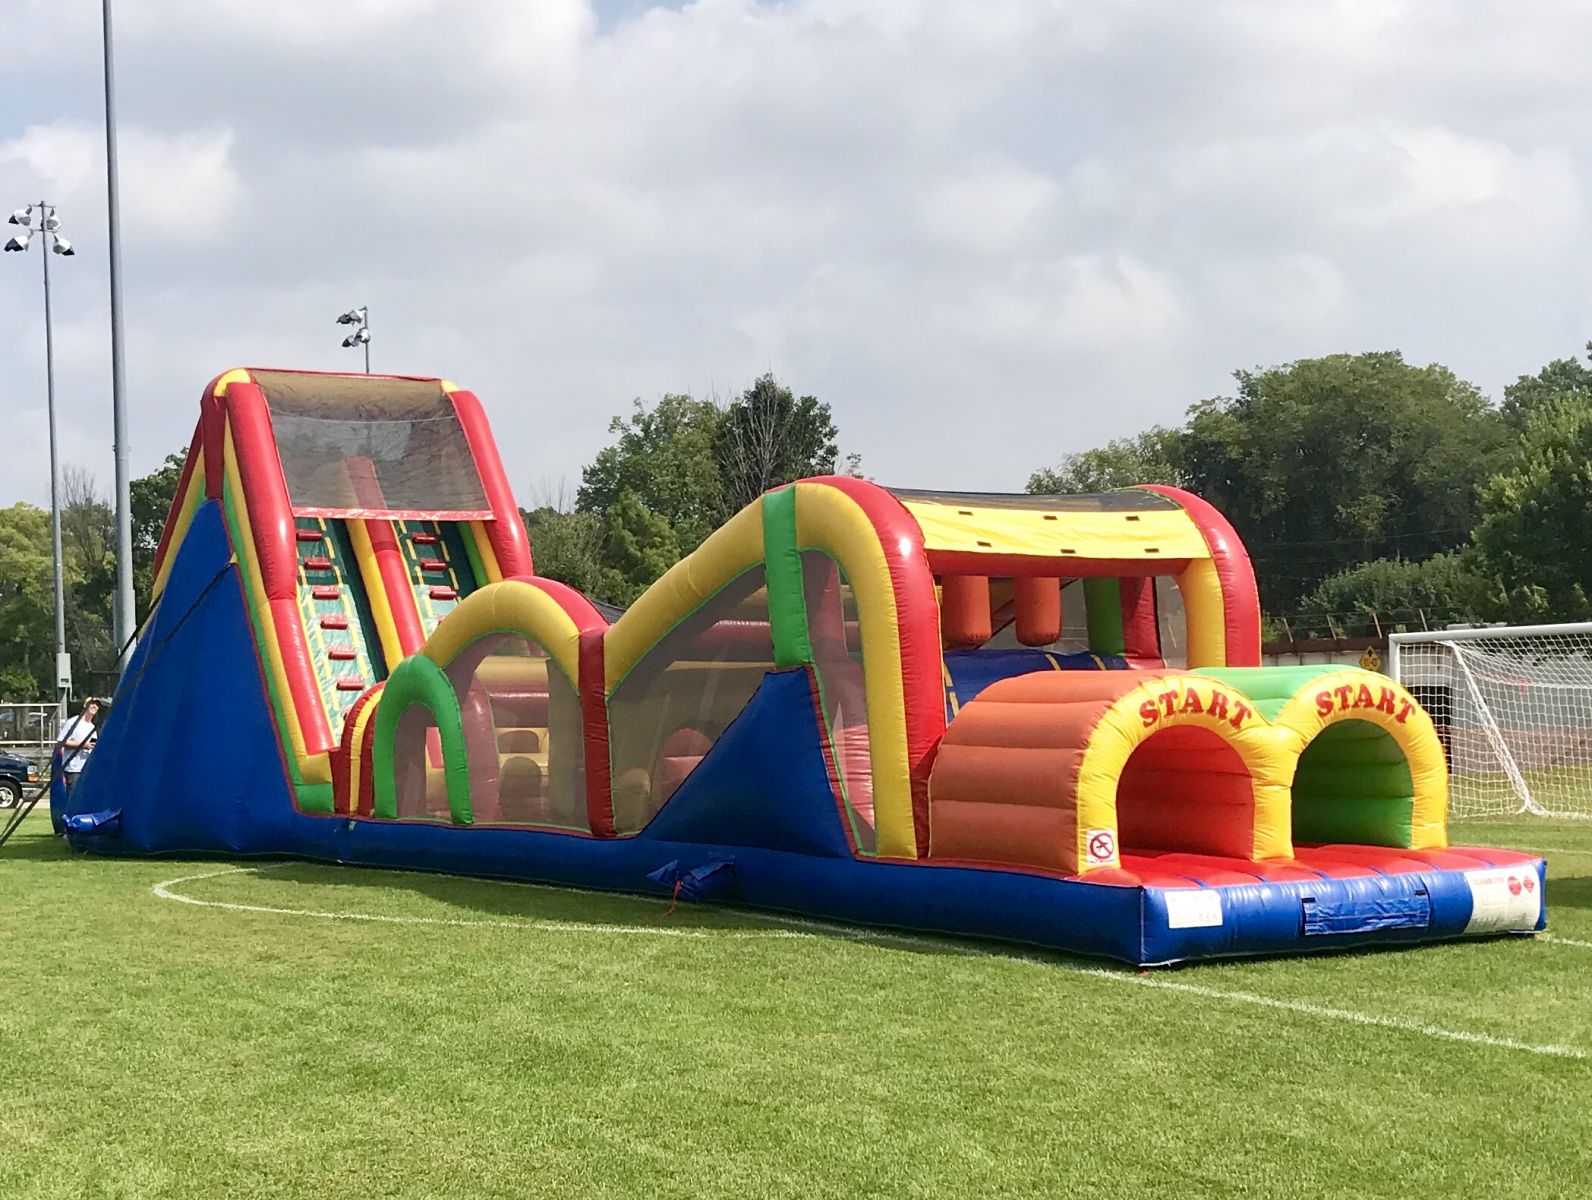 77ft. Extreme Obstacle Course Rental